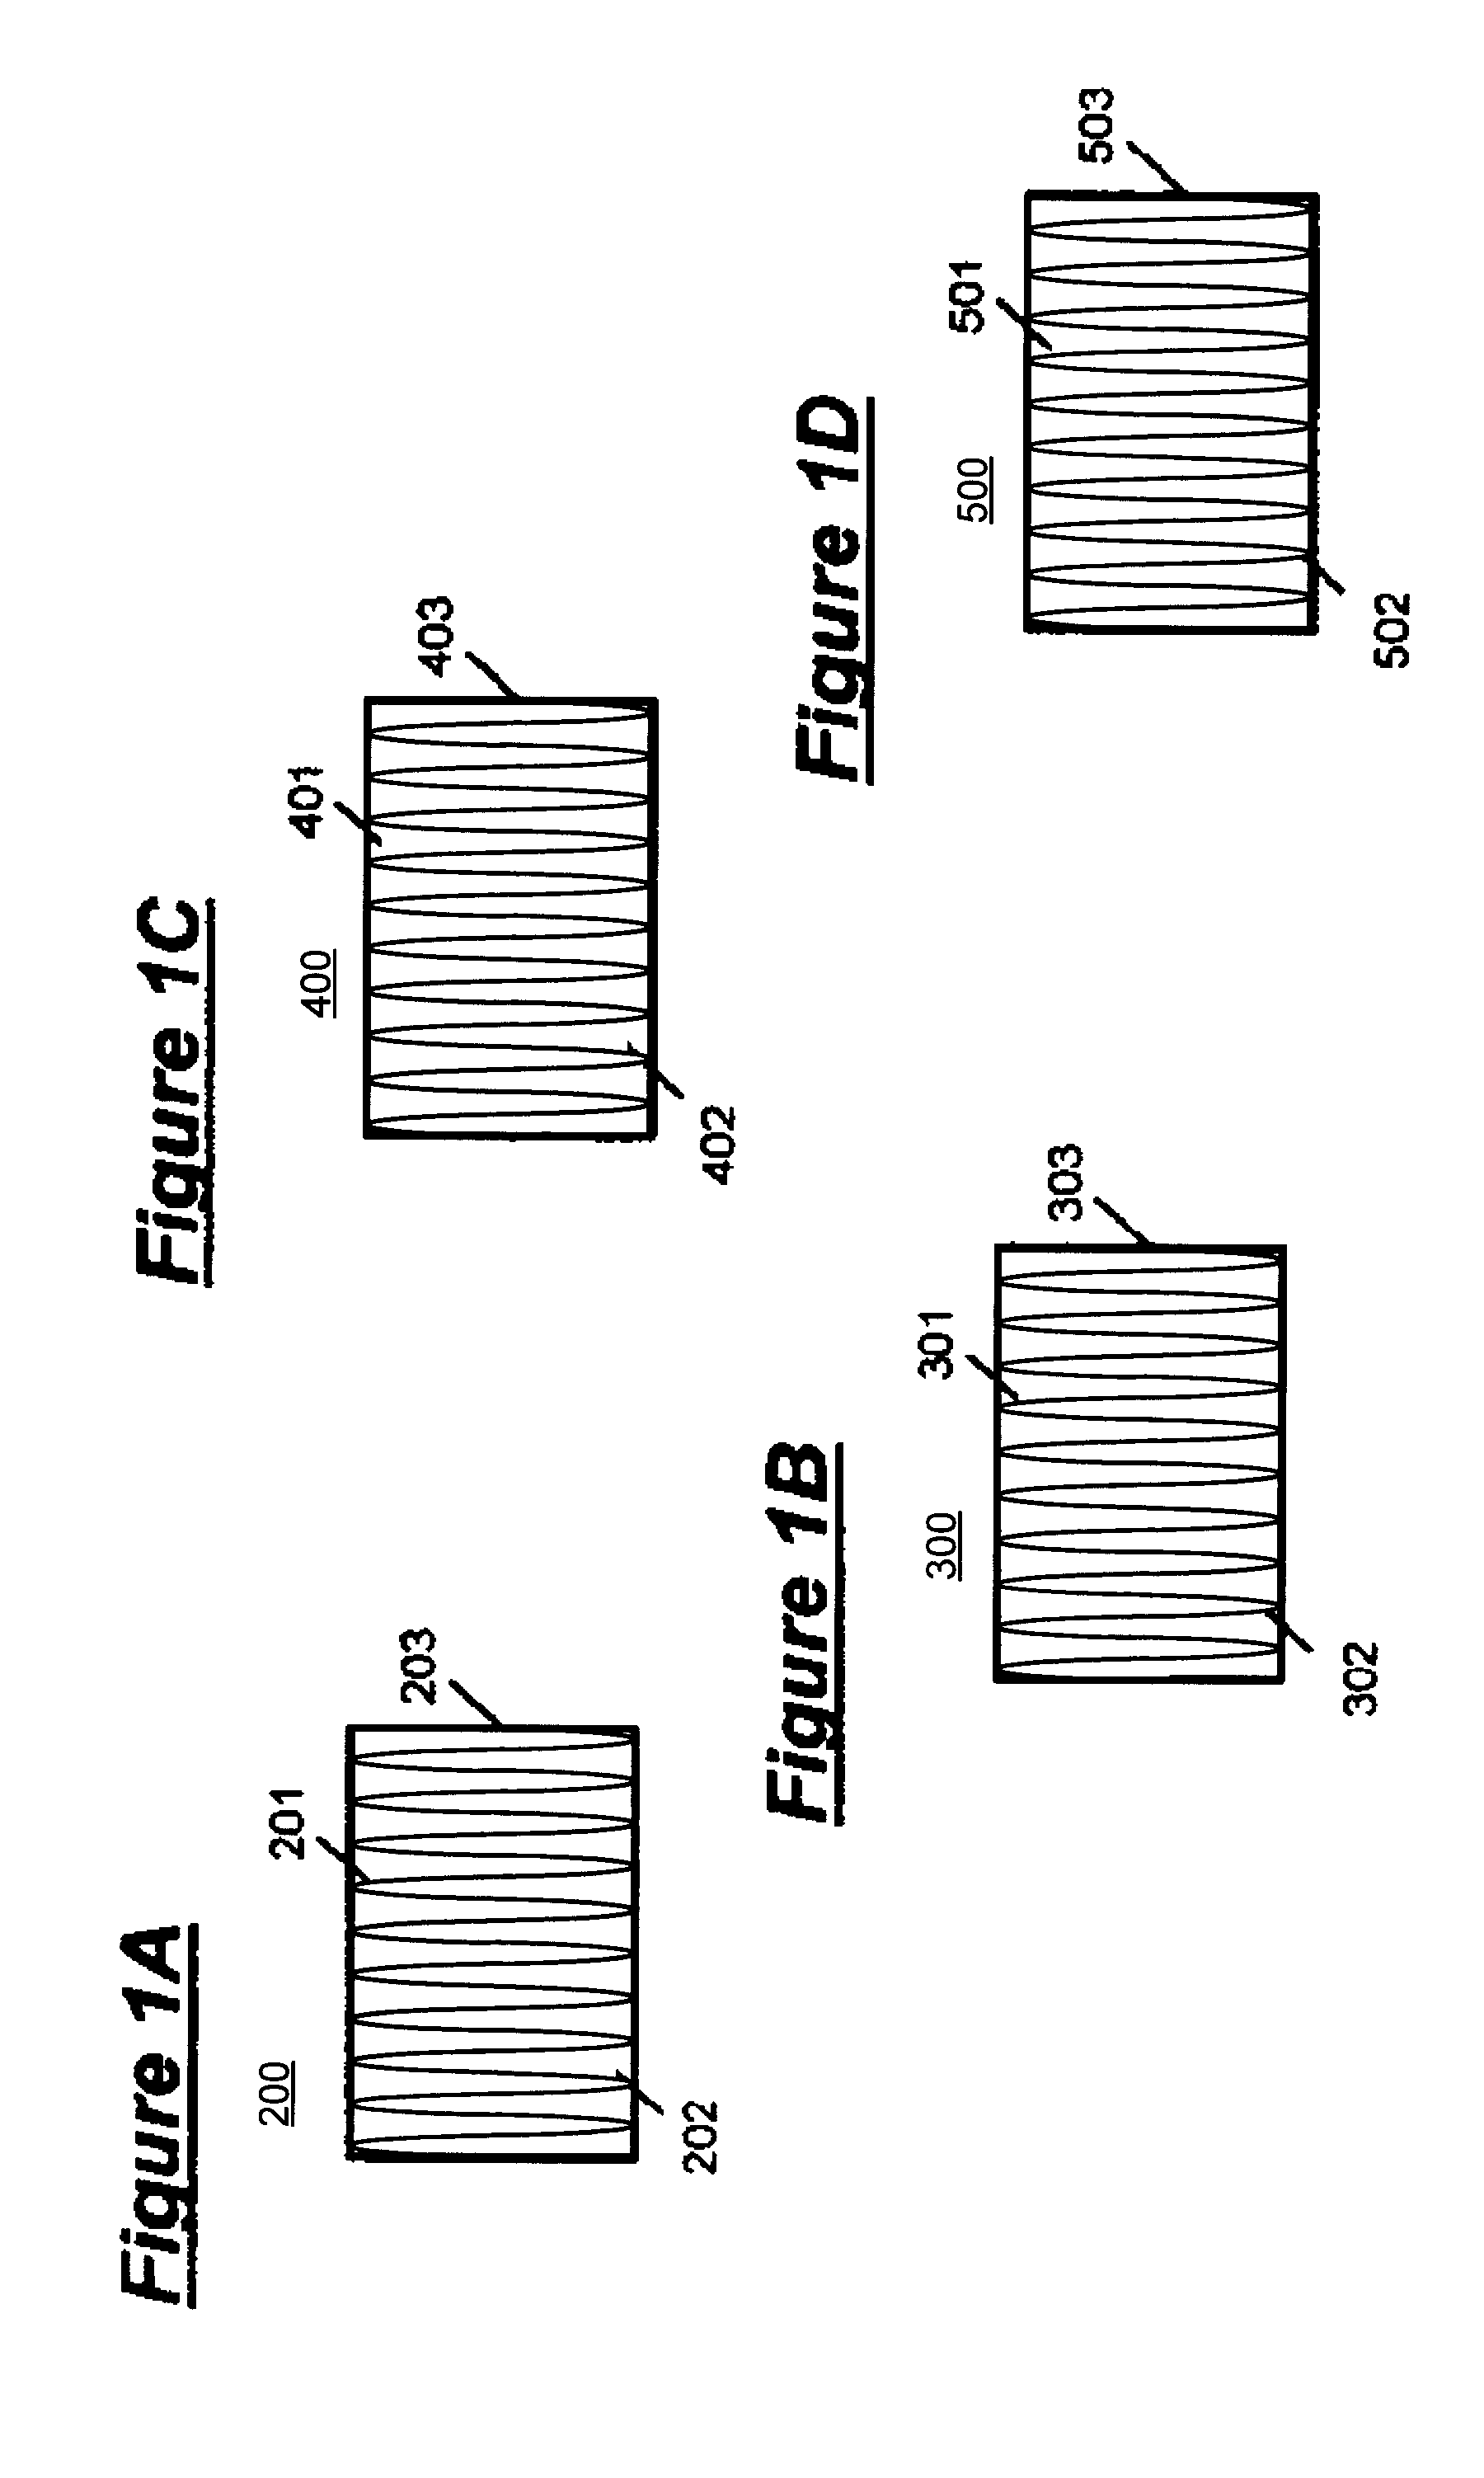 Micro component liquid hydrocarbon steam reformer system and cycle for producing hydrogen gas